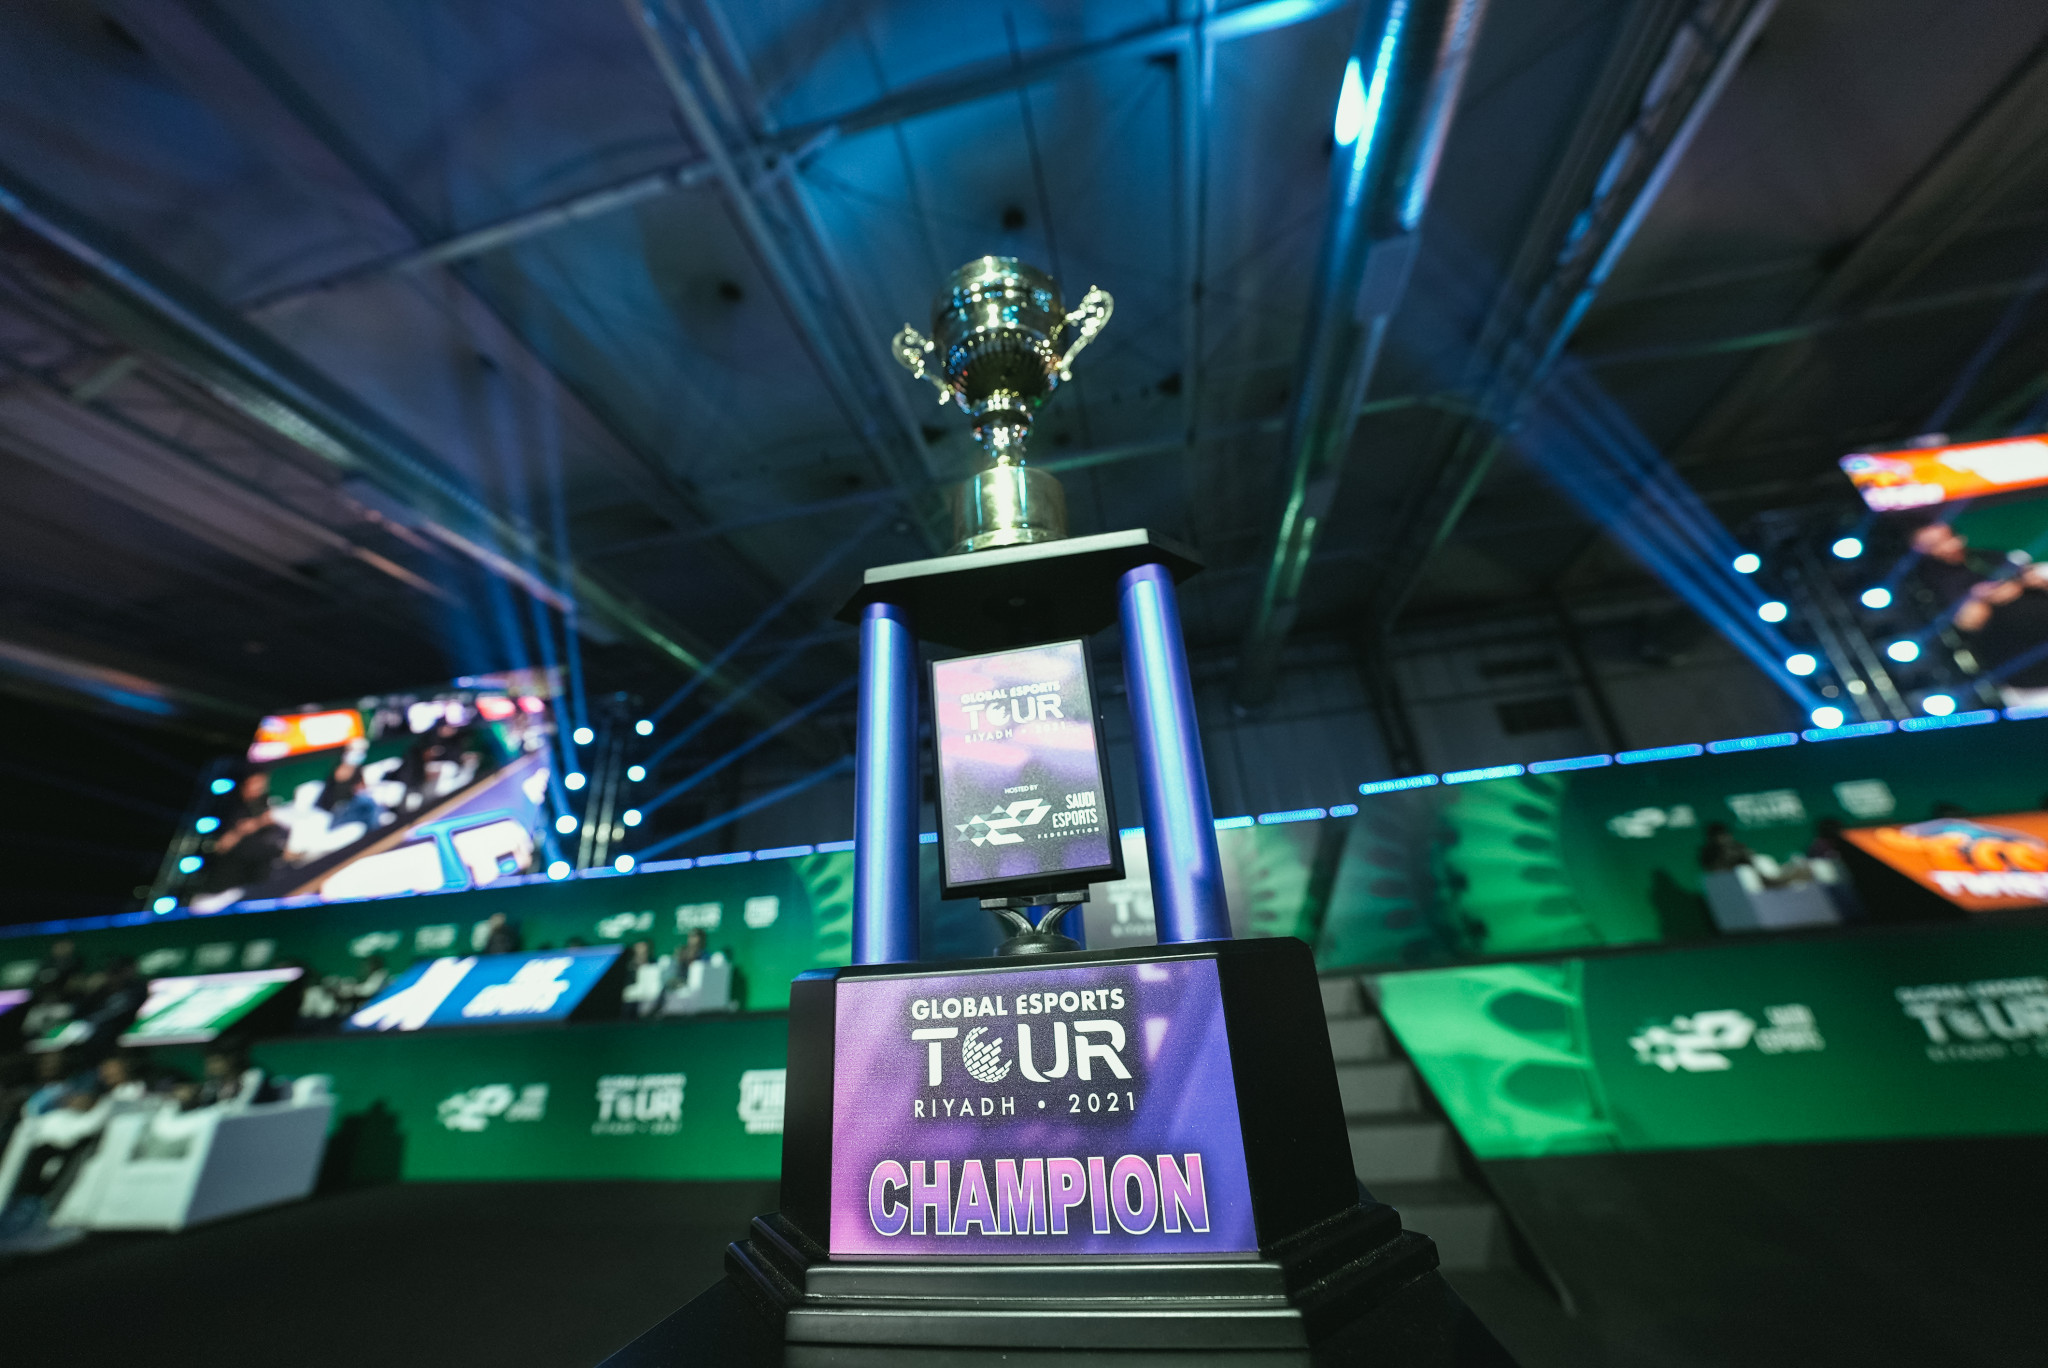 Team YaLLa win Global Esports Federation's first live audience event in